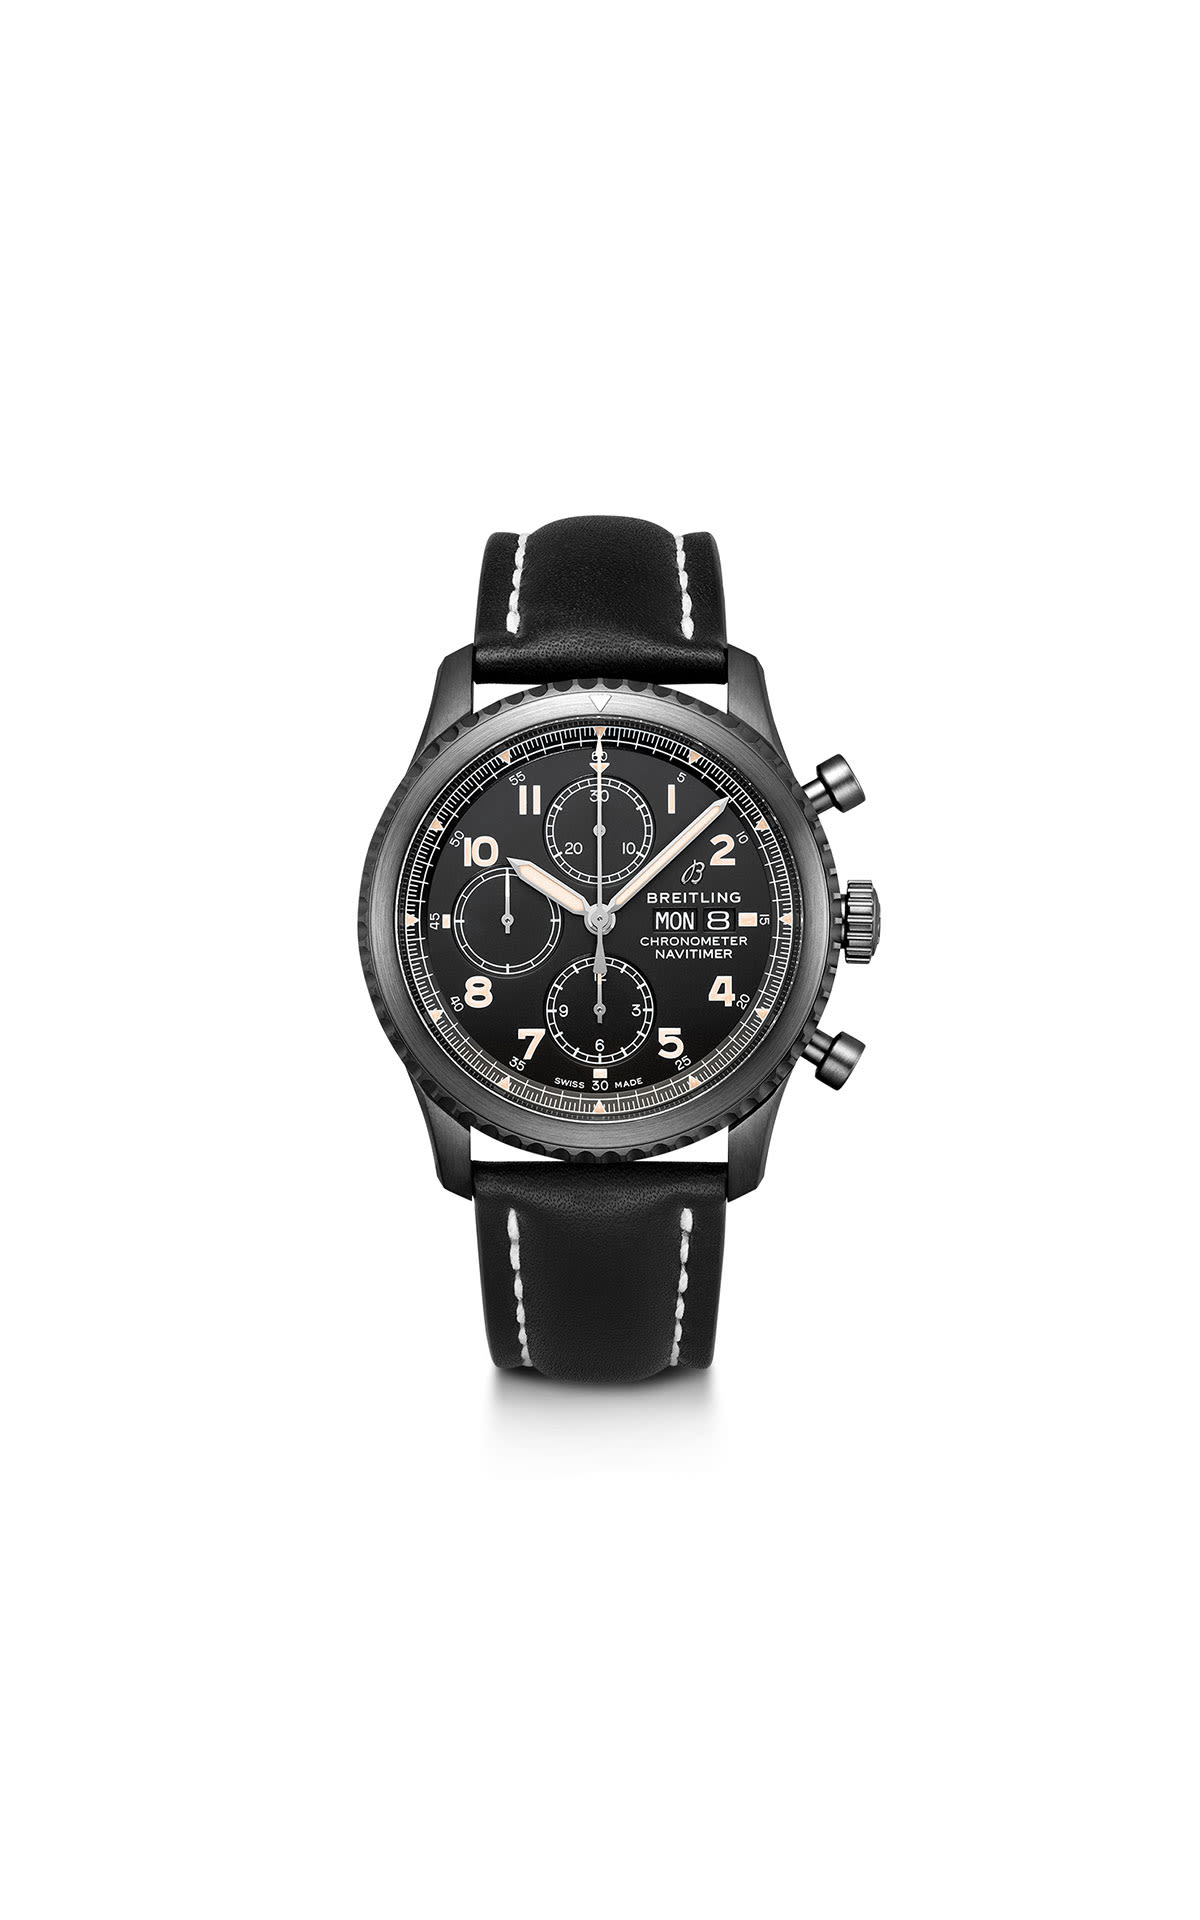 Breitling Navitimer 8 chronograph 43 from Bicester Village